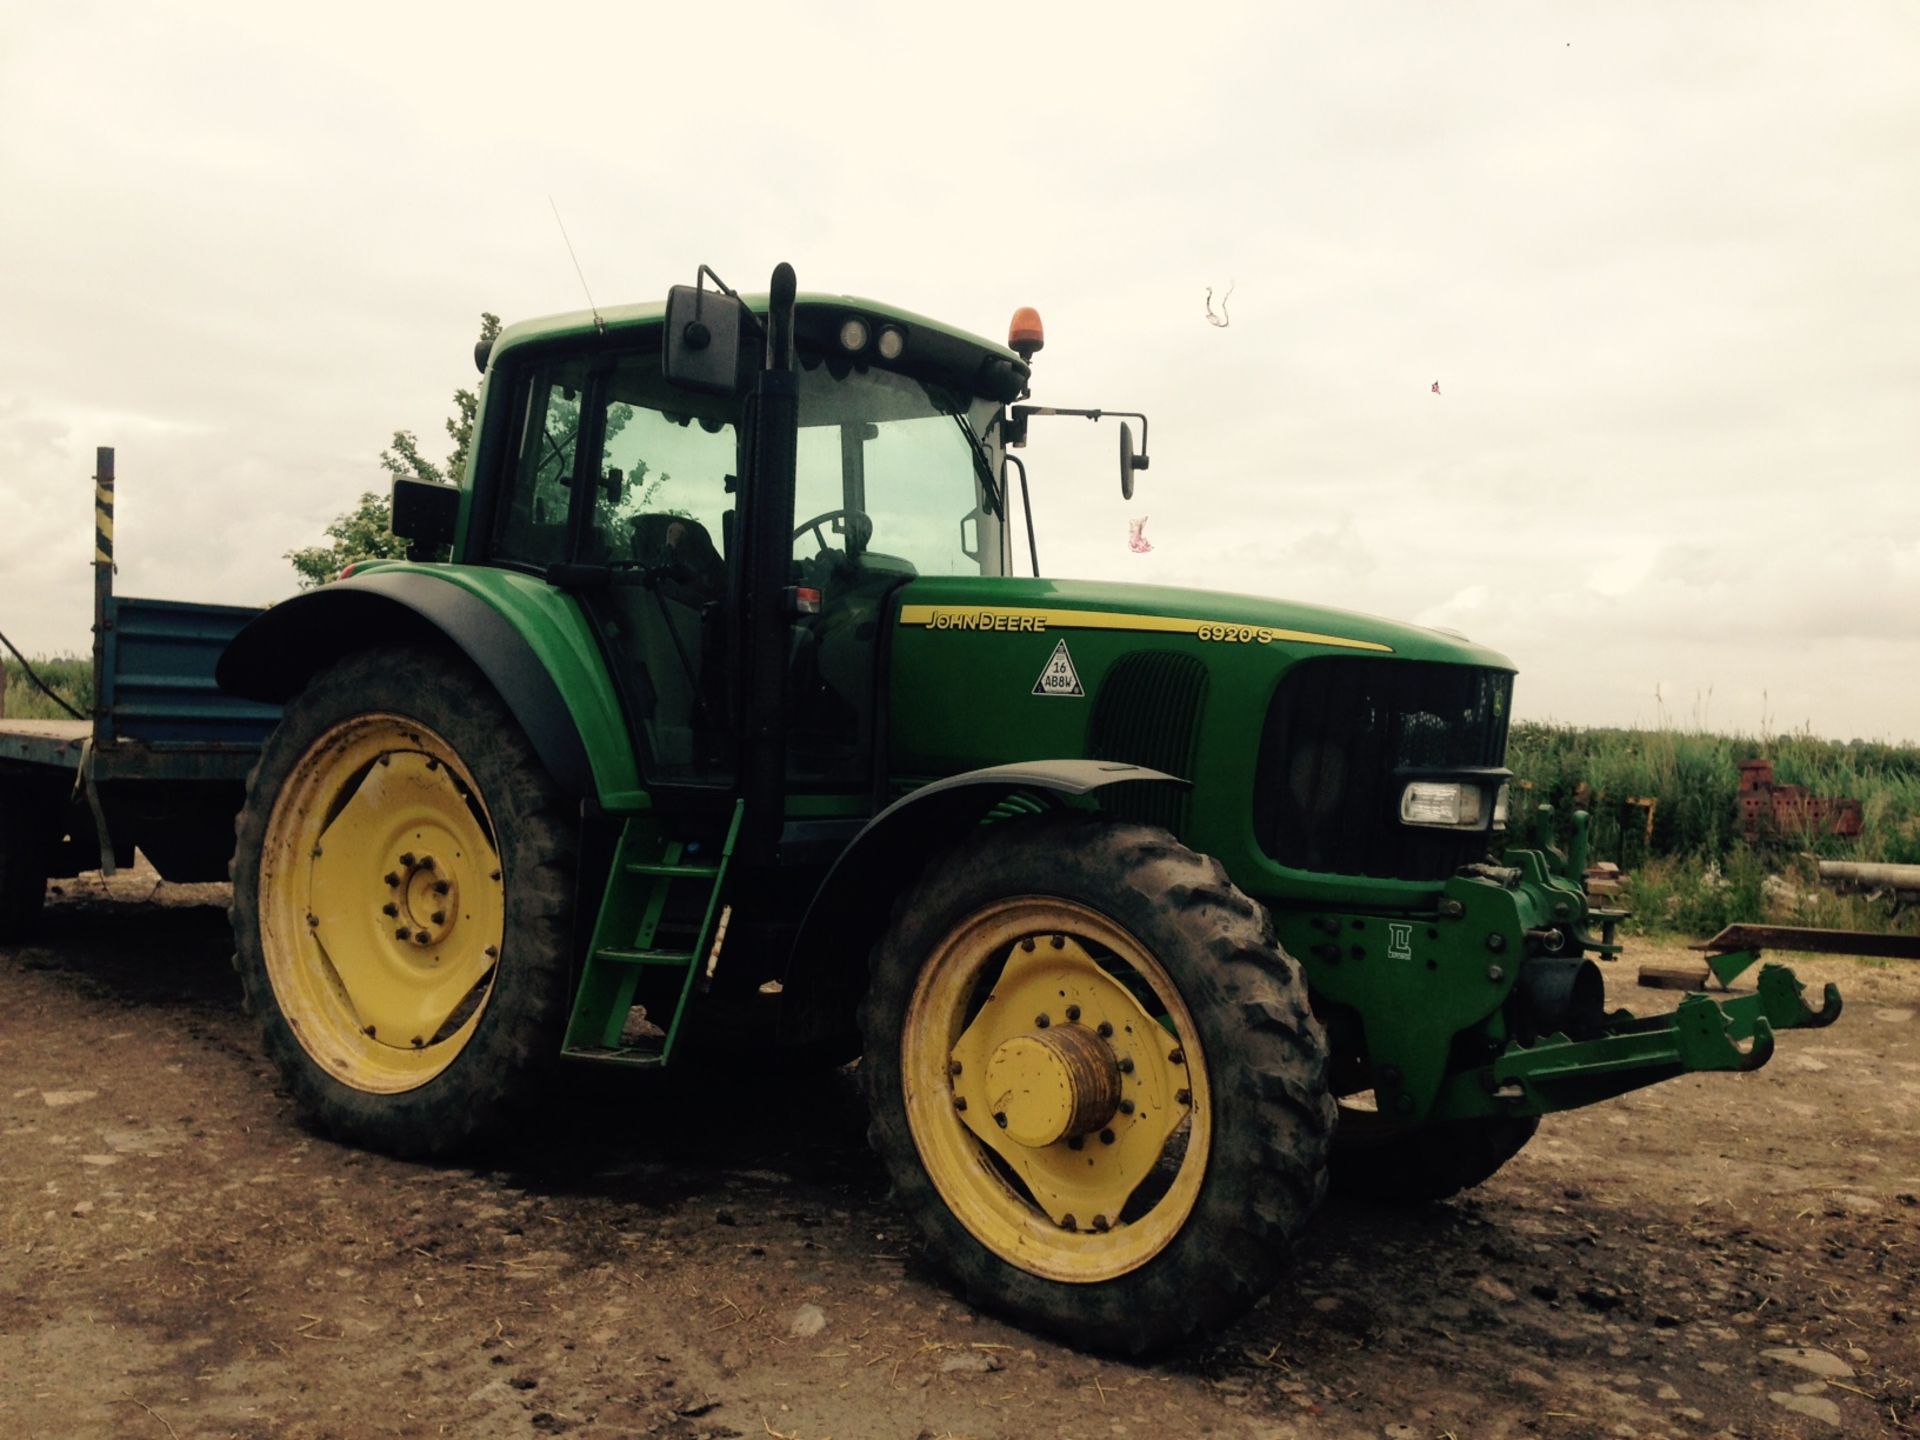 2005 John Deere 6920S Tractor 50k Power Quad c/w front linkage & pto. Location Bourne, Lincolnshire - Image 2 of 12